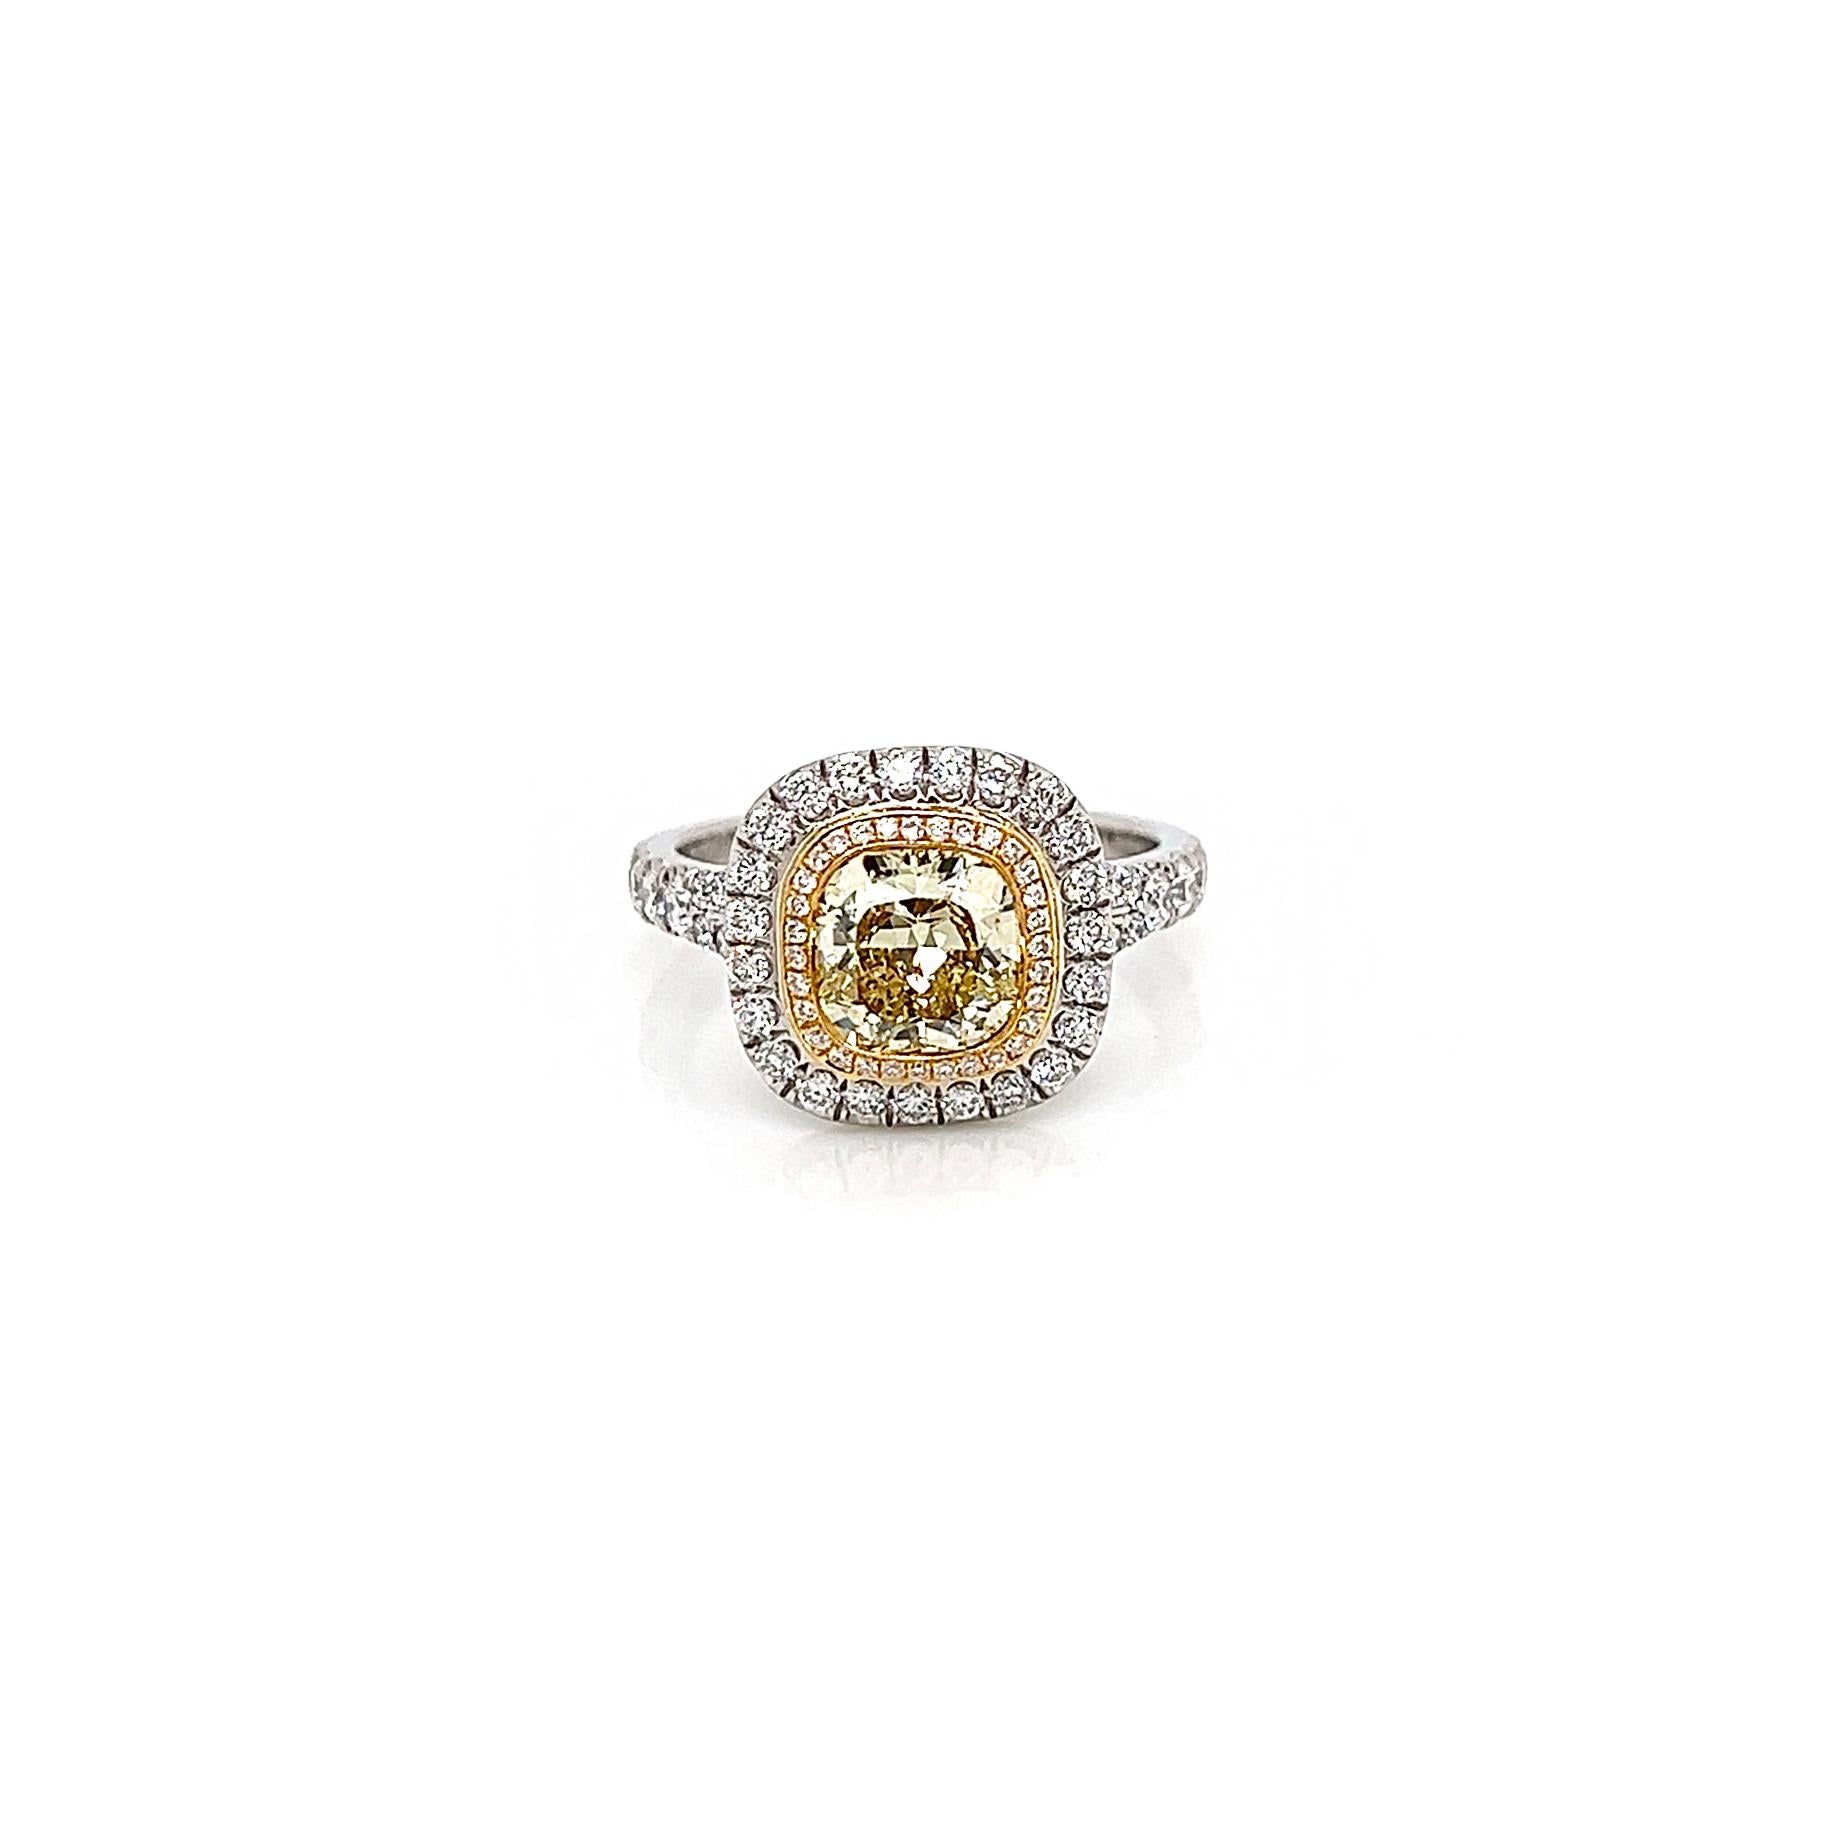 2.22 Total Carat Fancy Yellow Diamond Double Halo Pave-Set Ladies Engagement Ring, GIA Certified

Double halo diamond engagement ring is more than special, it is unique; and with one of a kind center stone 